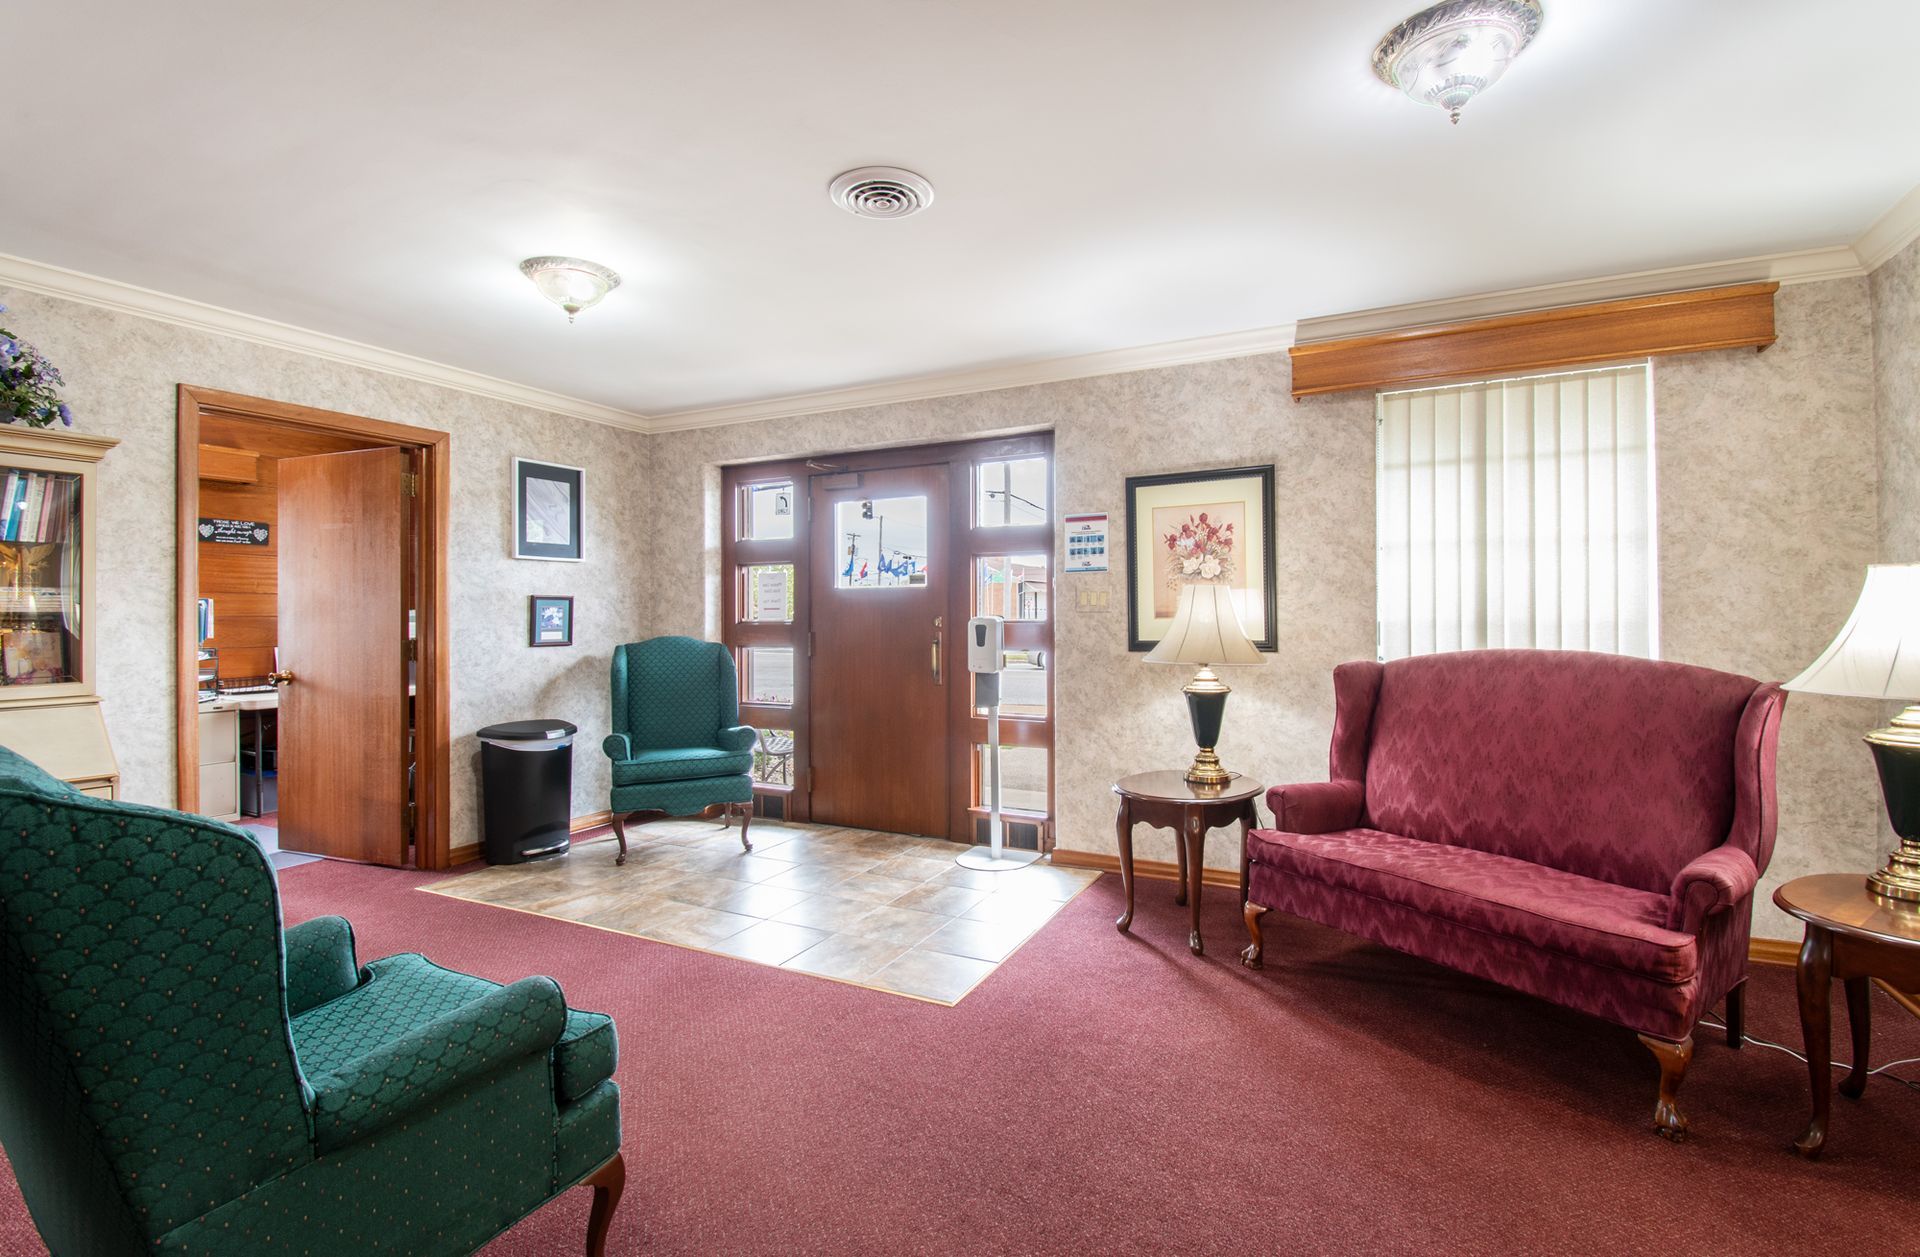 Paqulete-Falk Funeral Home Lobby